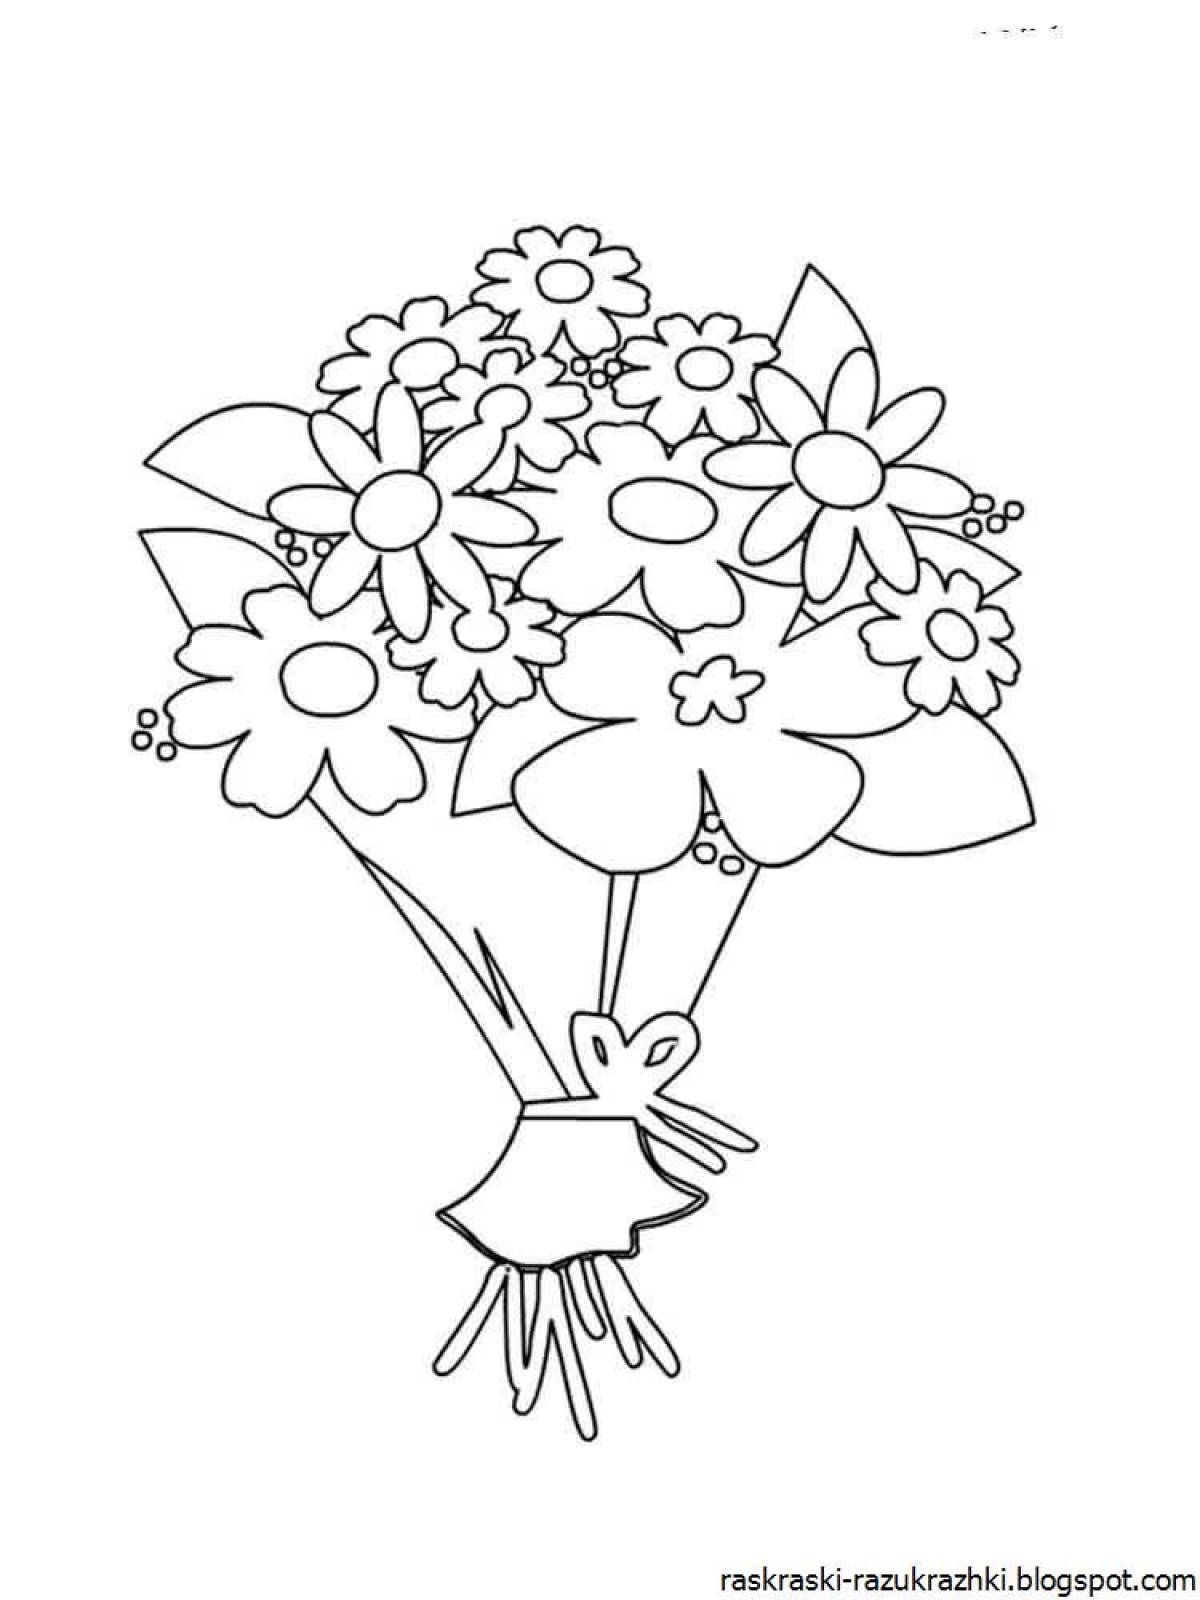 A charming bouquet of flowers for children